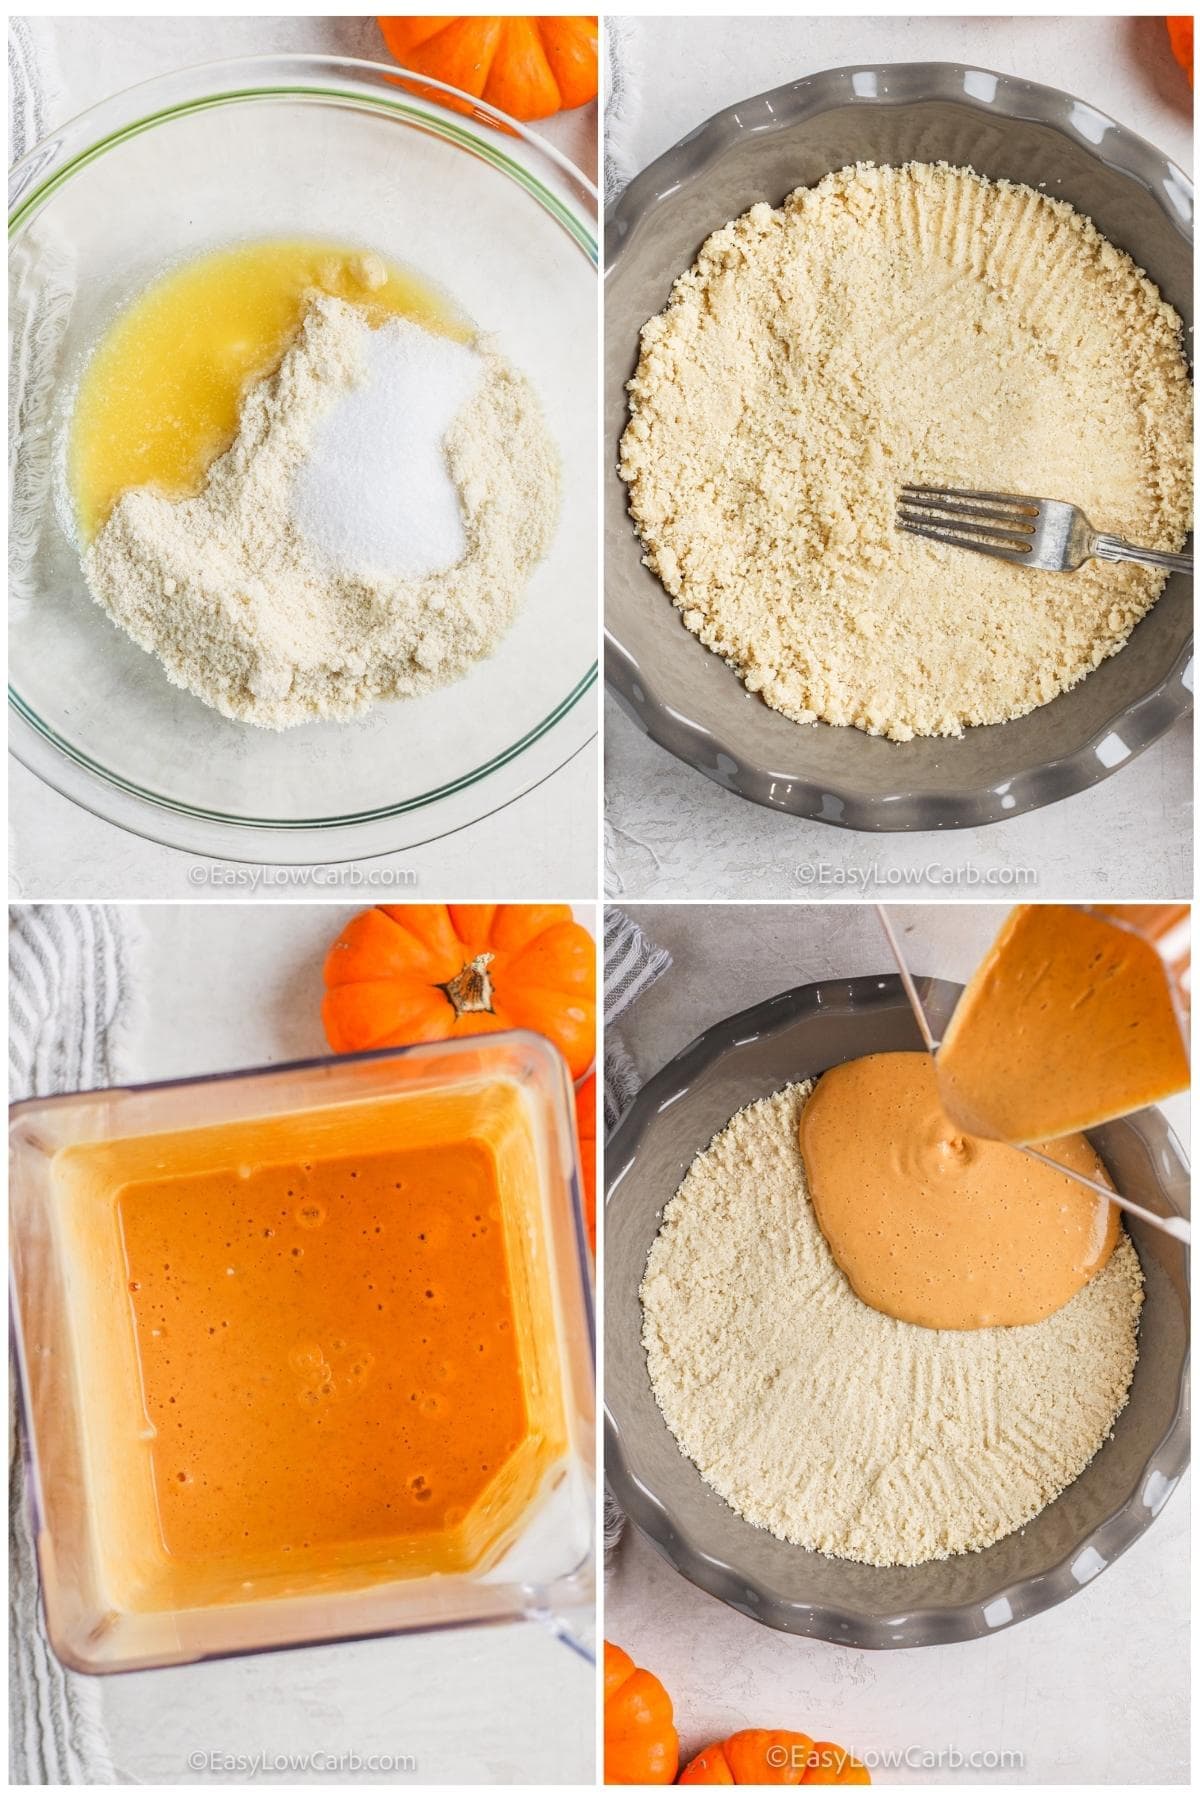 process of adding ingredients together to make Keto Pumpkin Cheesecake